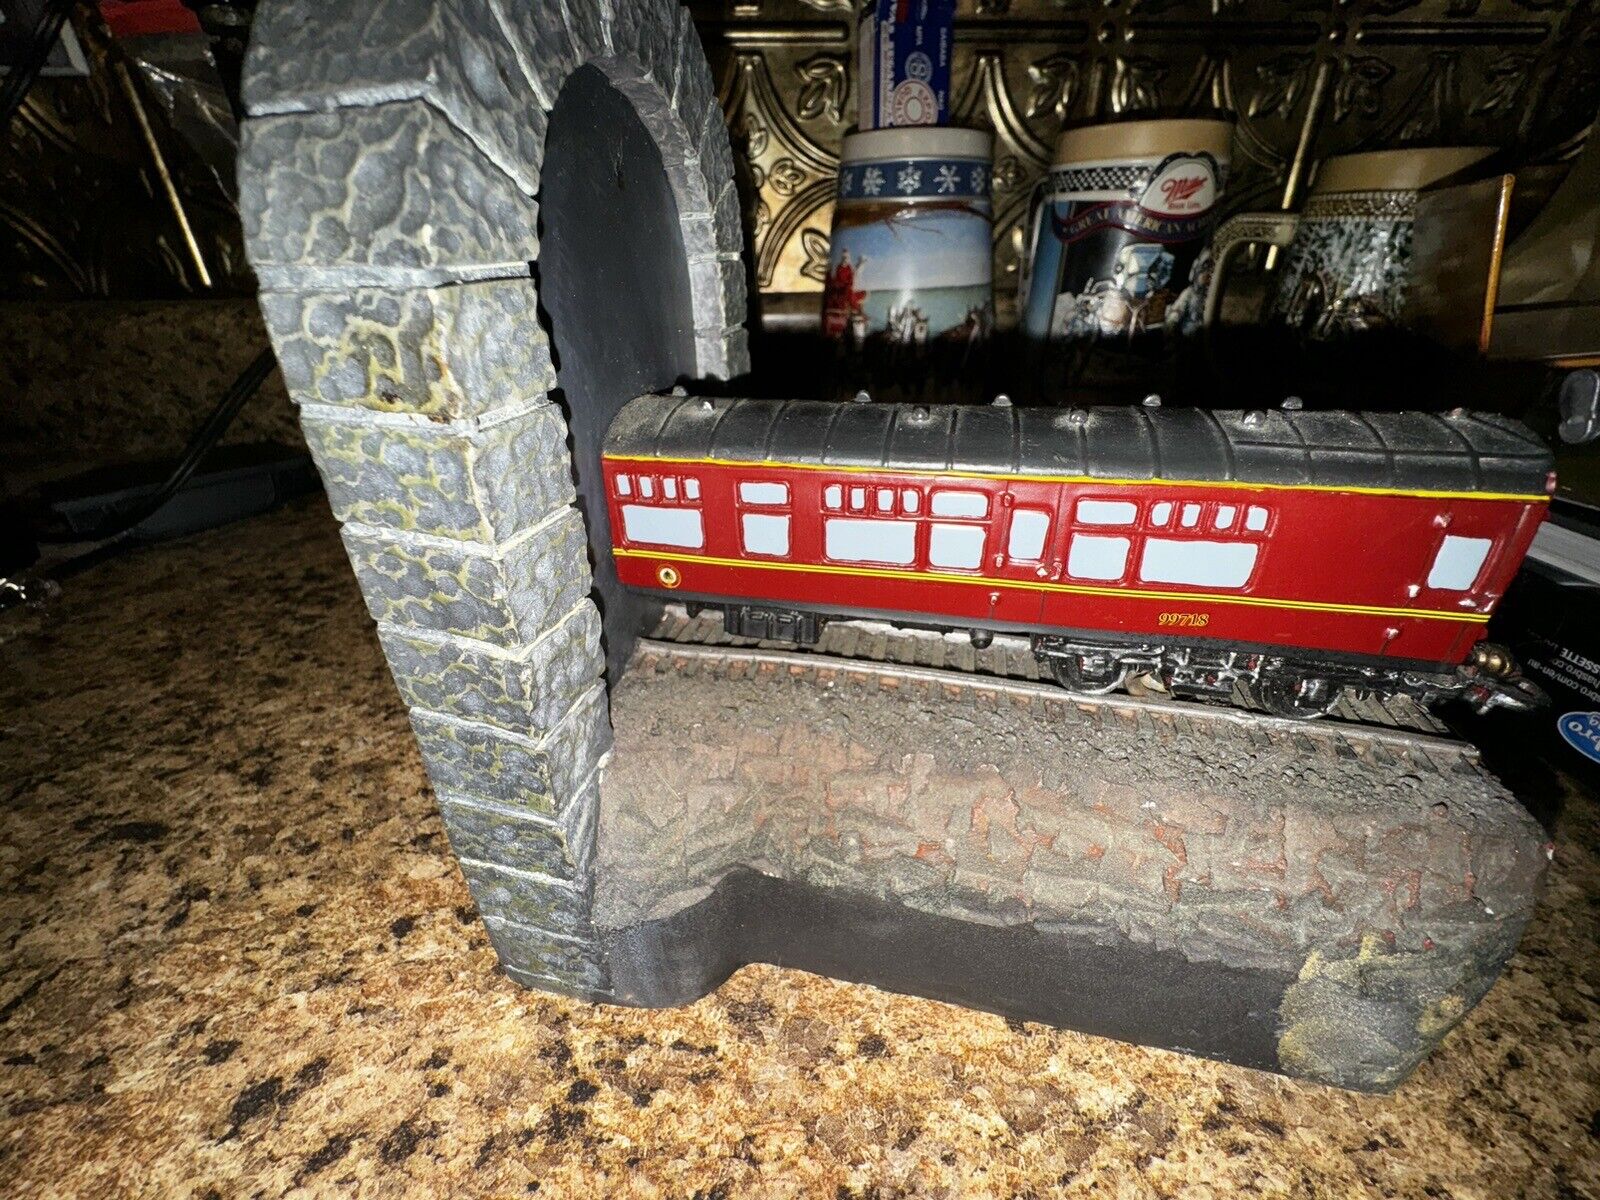 *NOT A PAIR* HARRY POTTER HOGWARTS EXPRESS TRAIN BOOKEND - NECA, Just Caboose